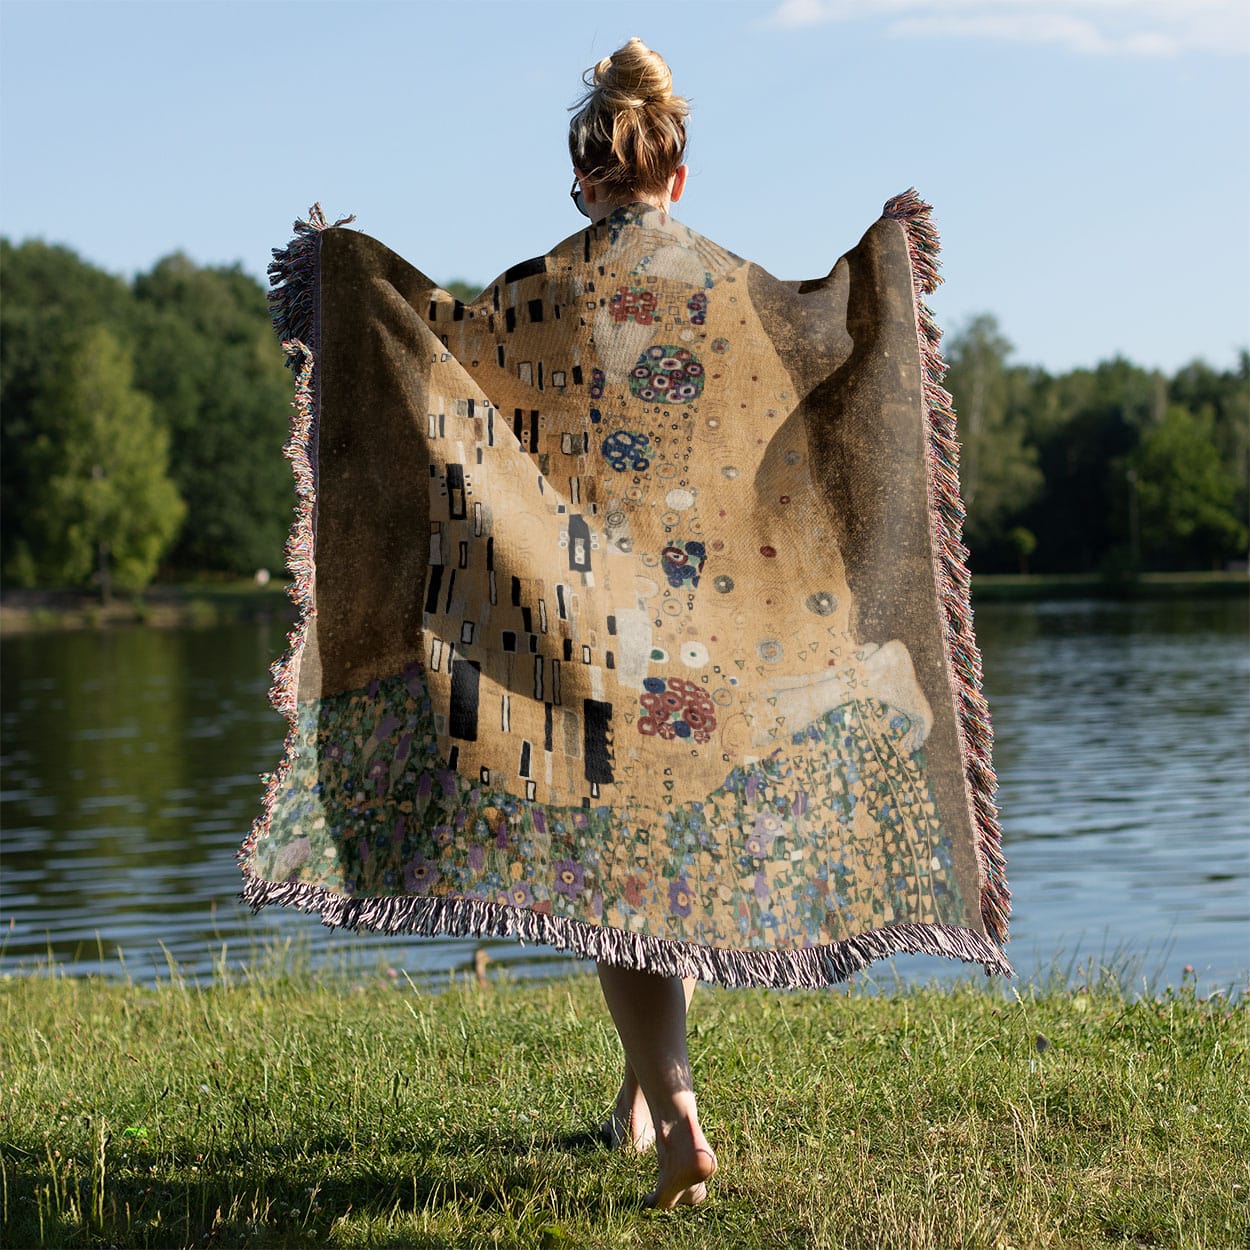 Famous Kissing Woven Blanket Held on a Woman's Back Outside